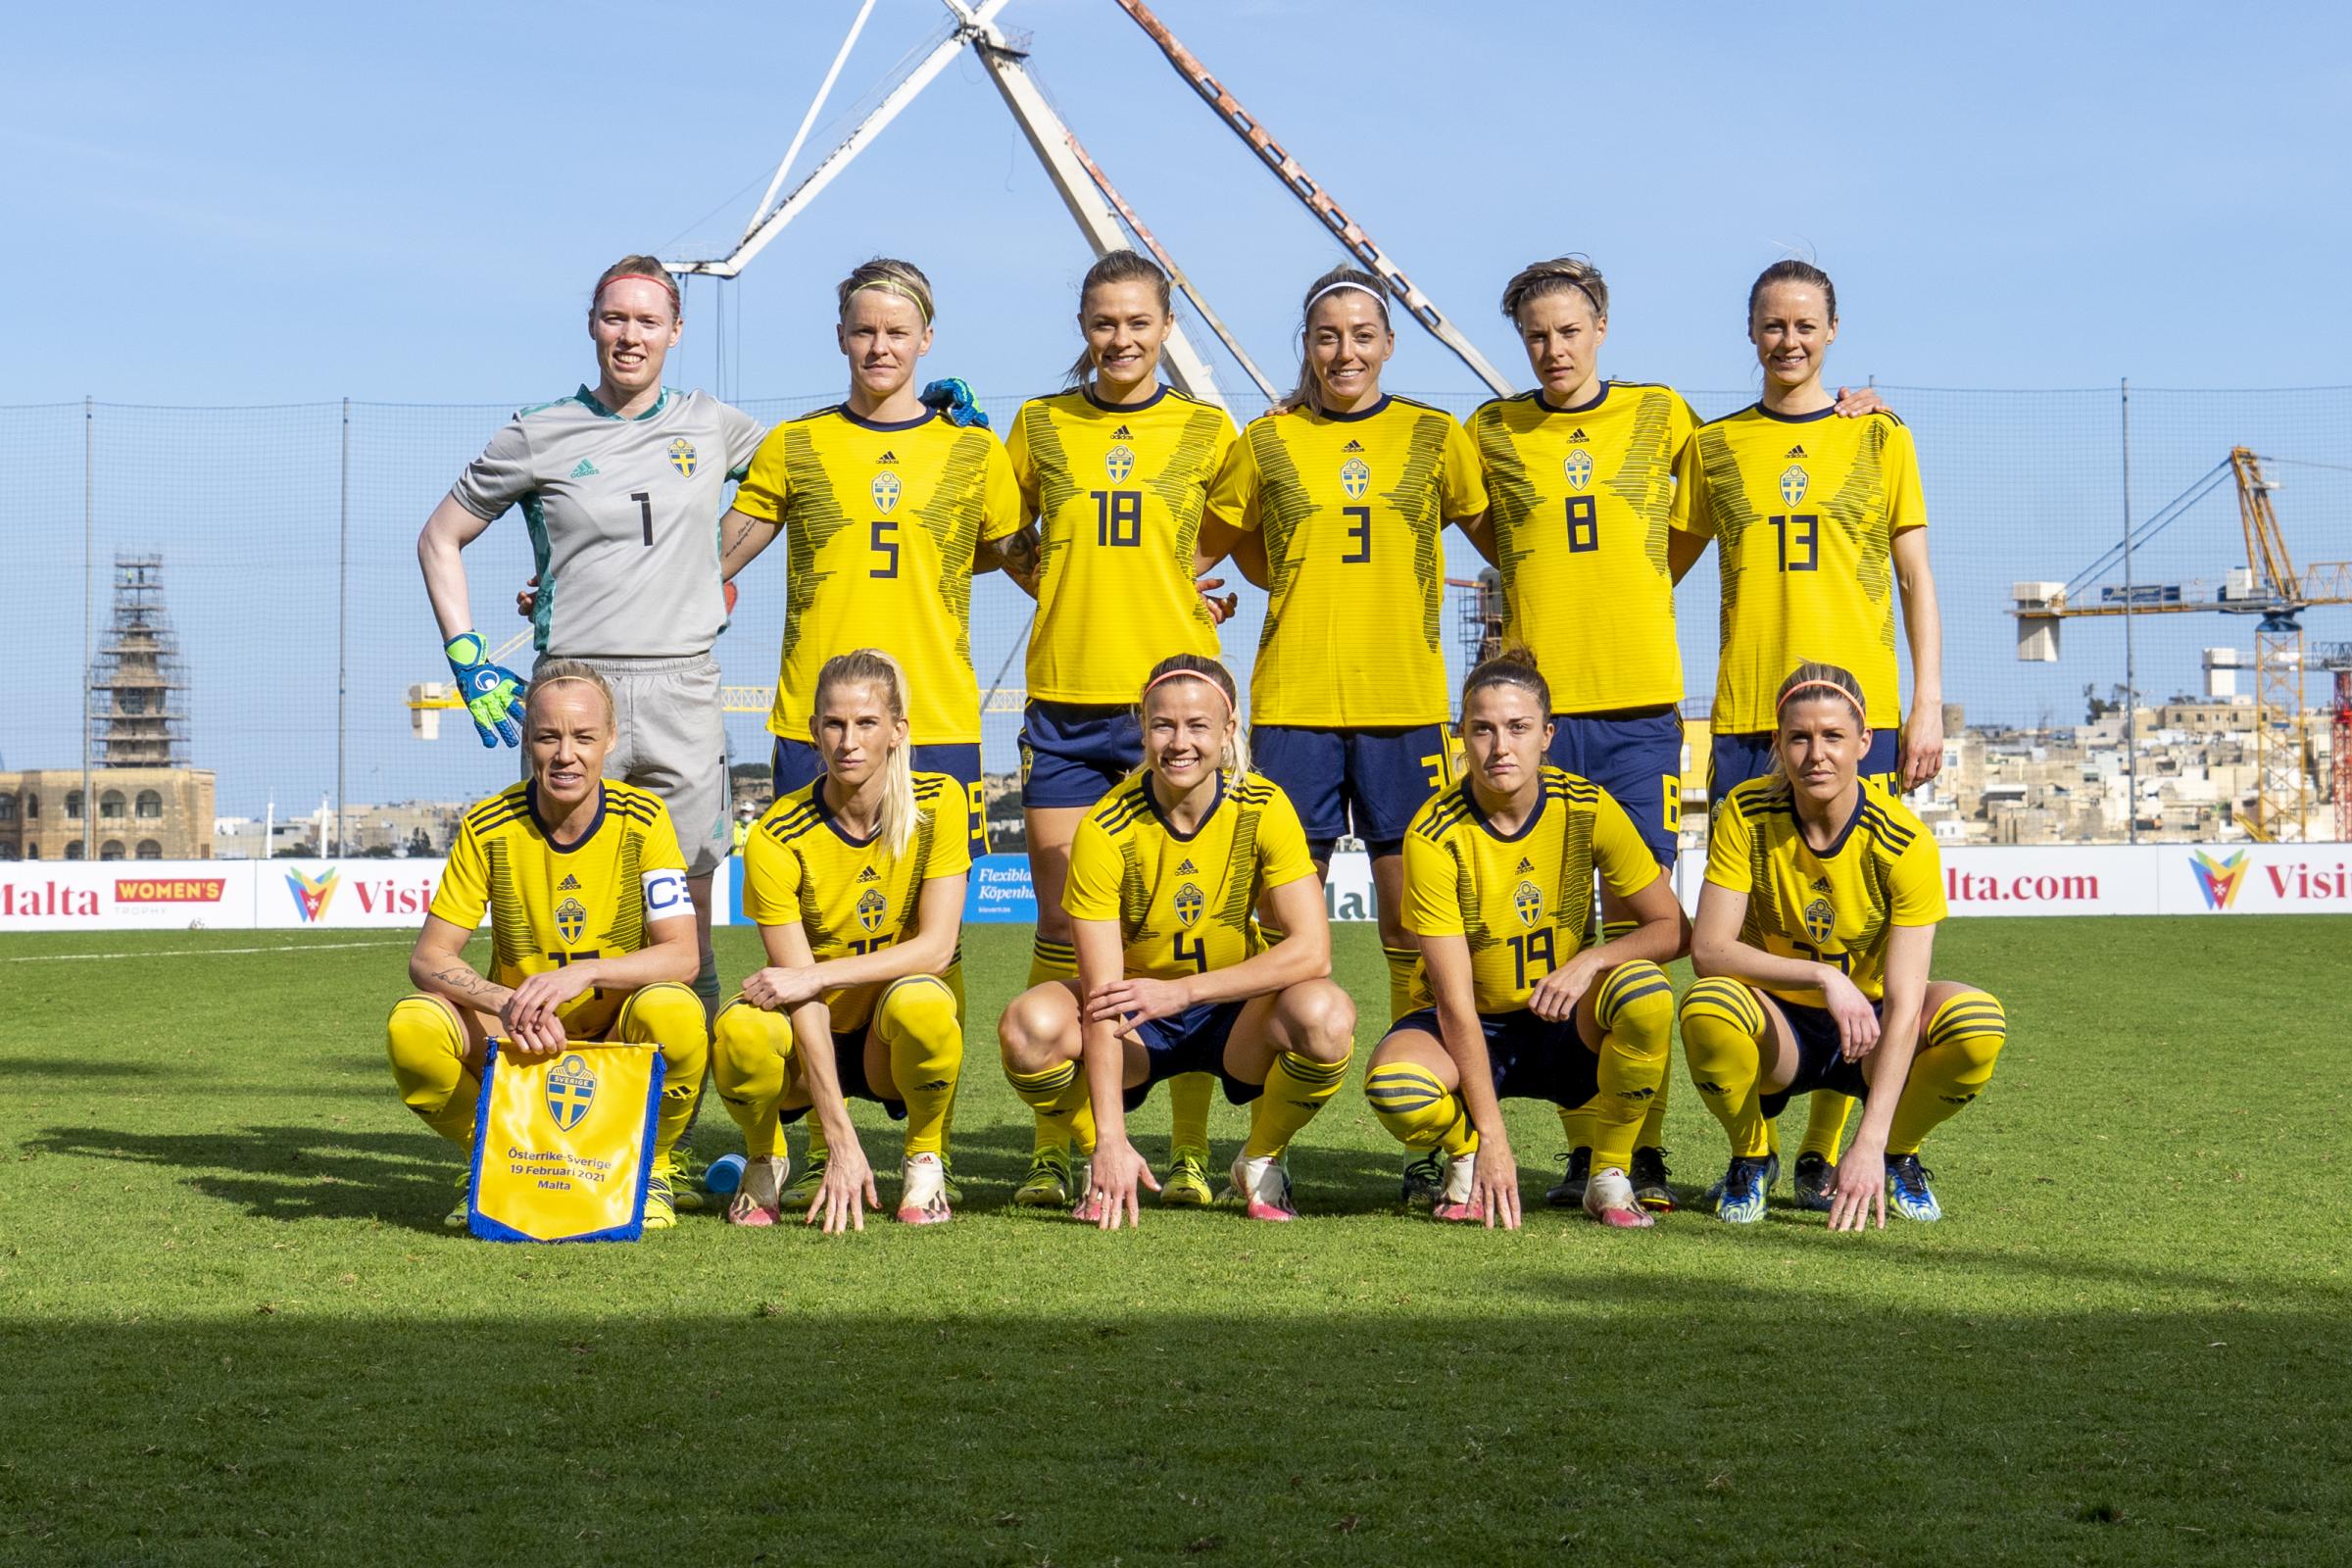 The Swedish women's football team is considered the favorites for this year's UEFA Women's Euro 2022.